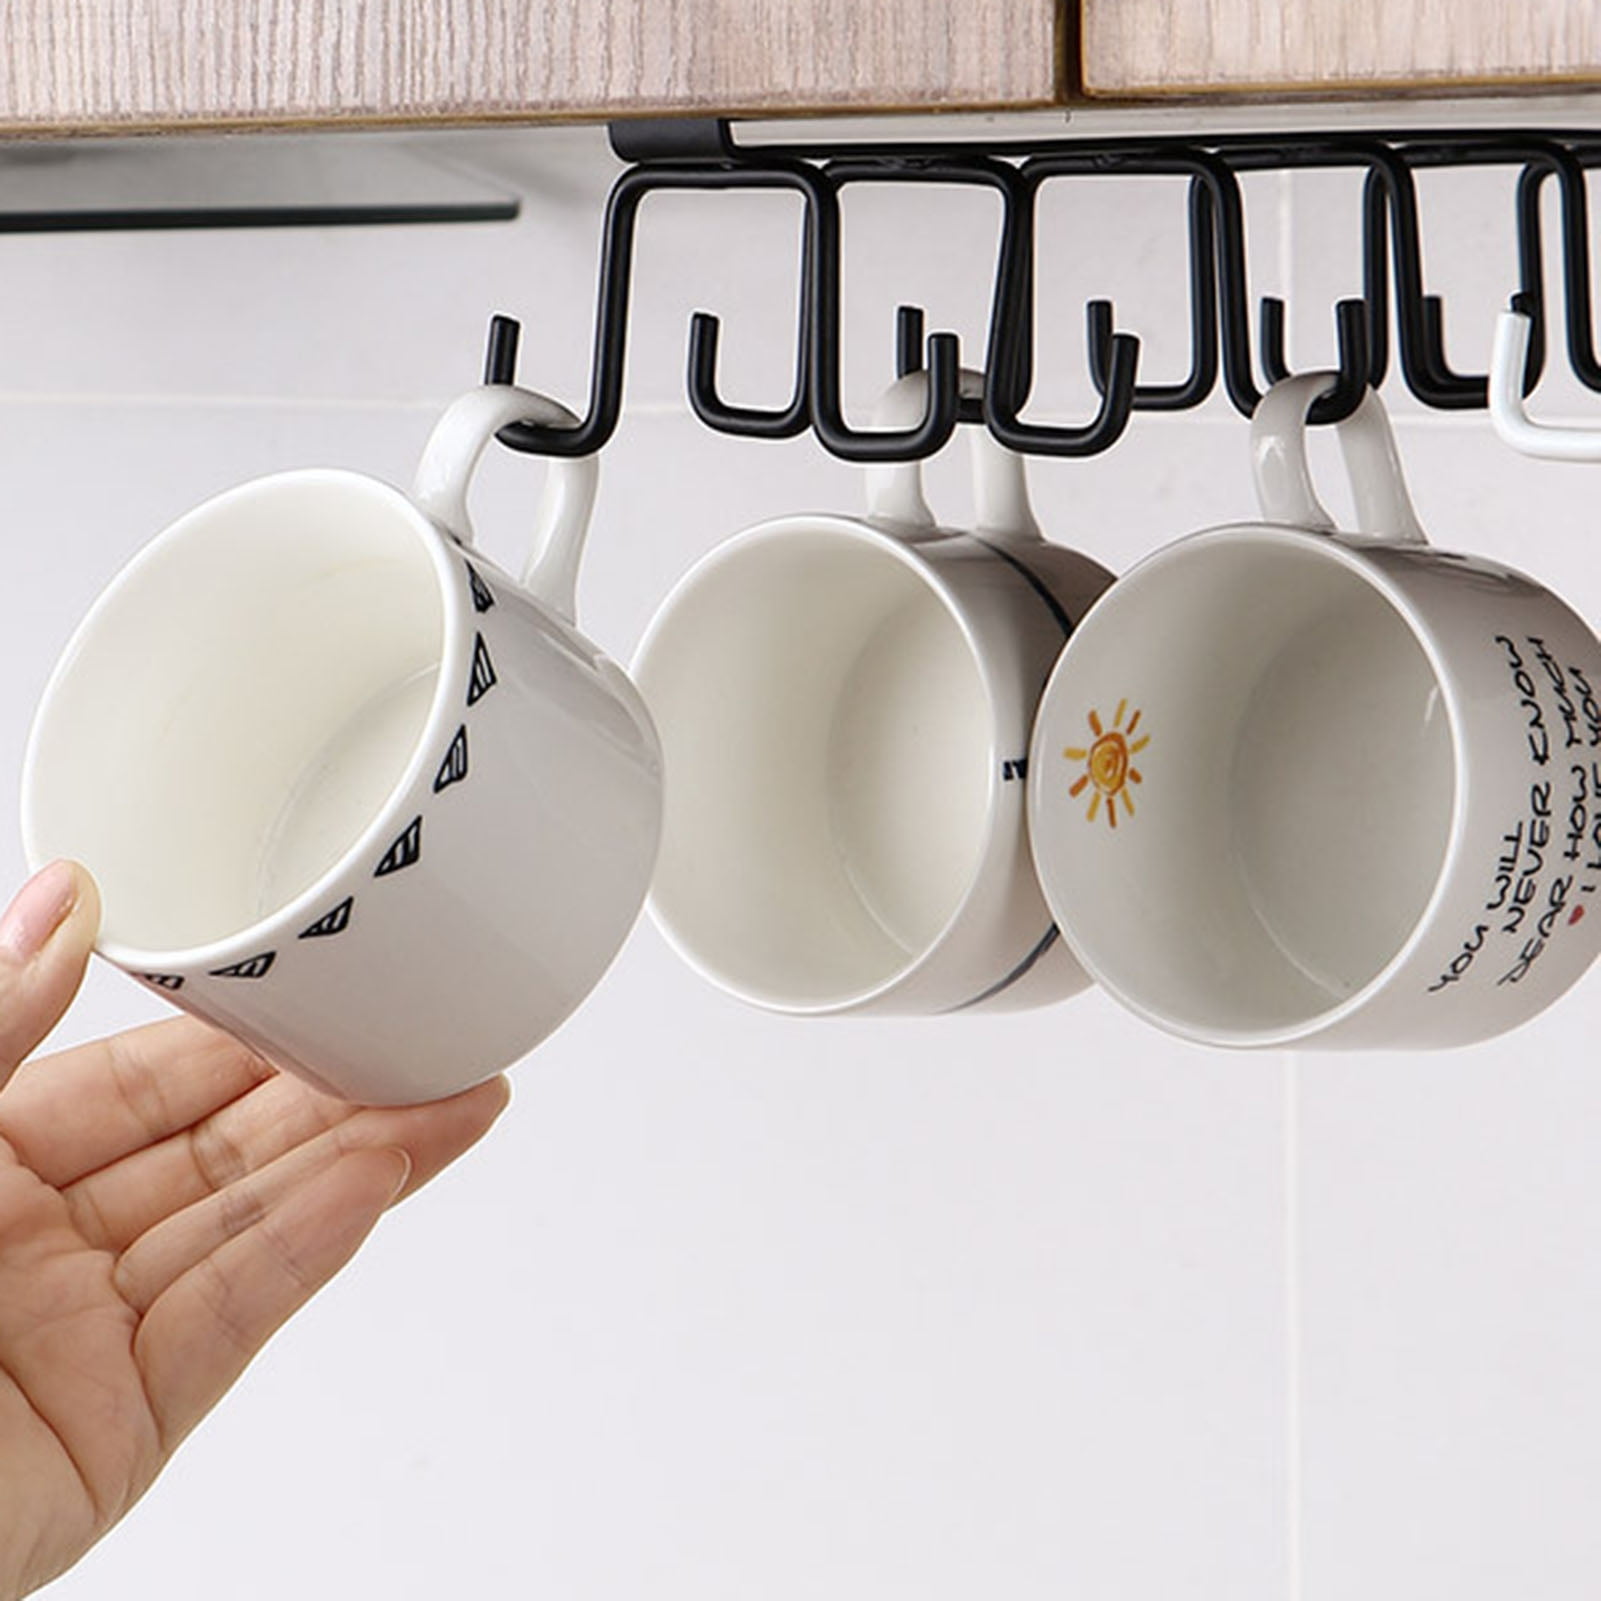 XILAOTOU Mug Rack Under Cabinet - Coffee Cup Holder, Each Bracket is  Equipped with 6 and Adjustable